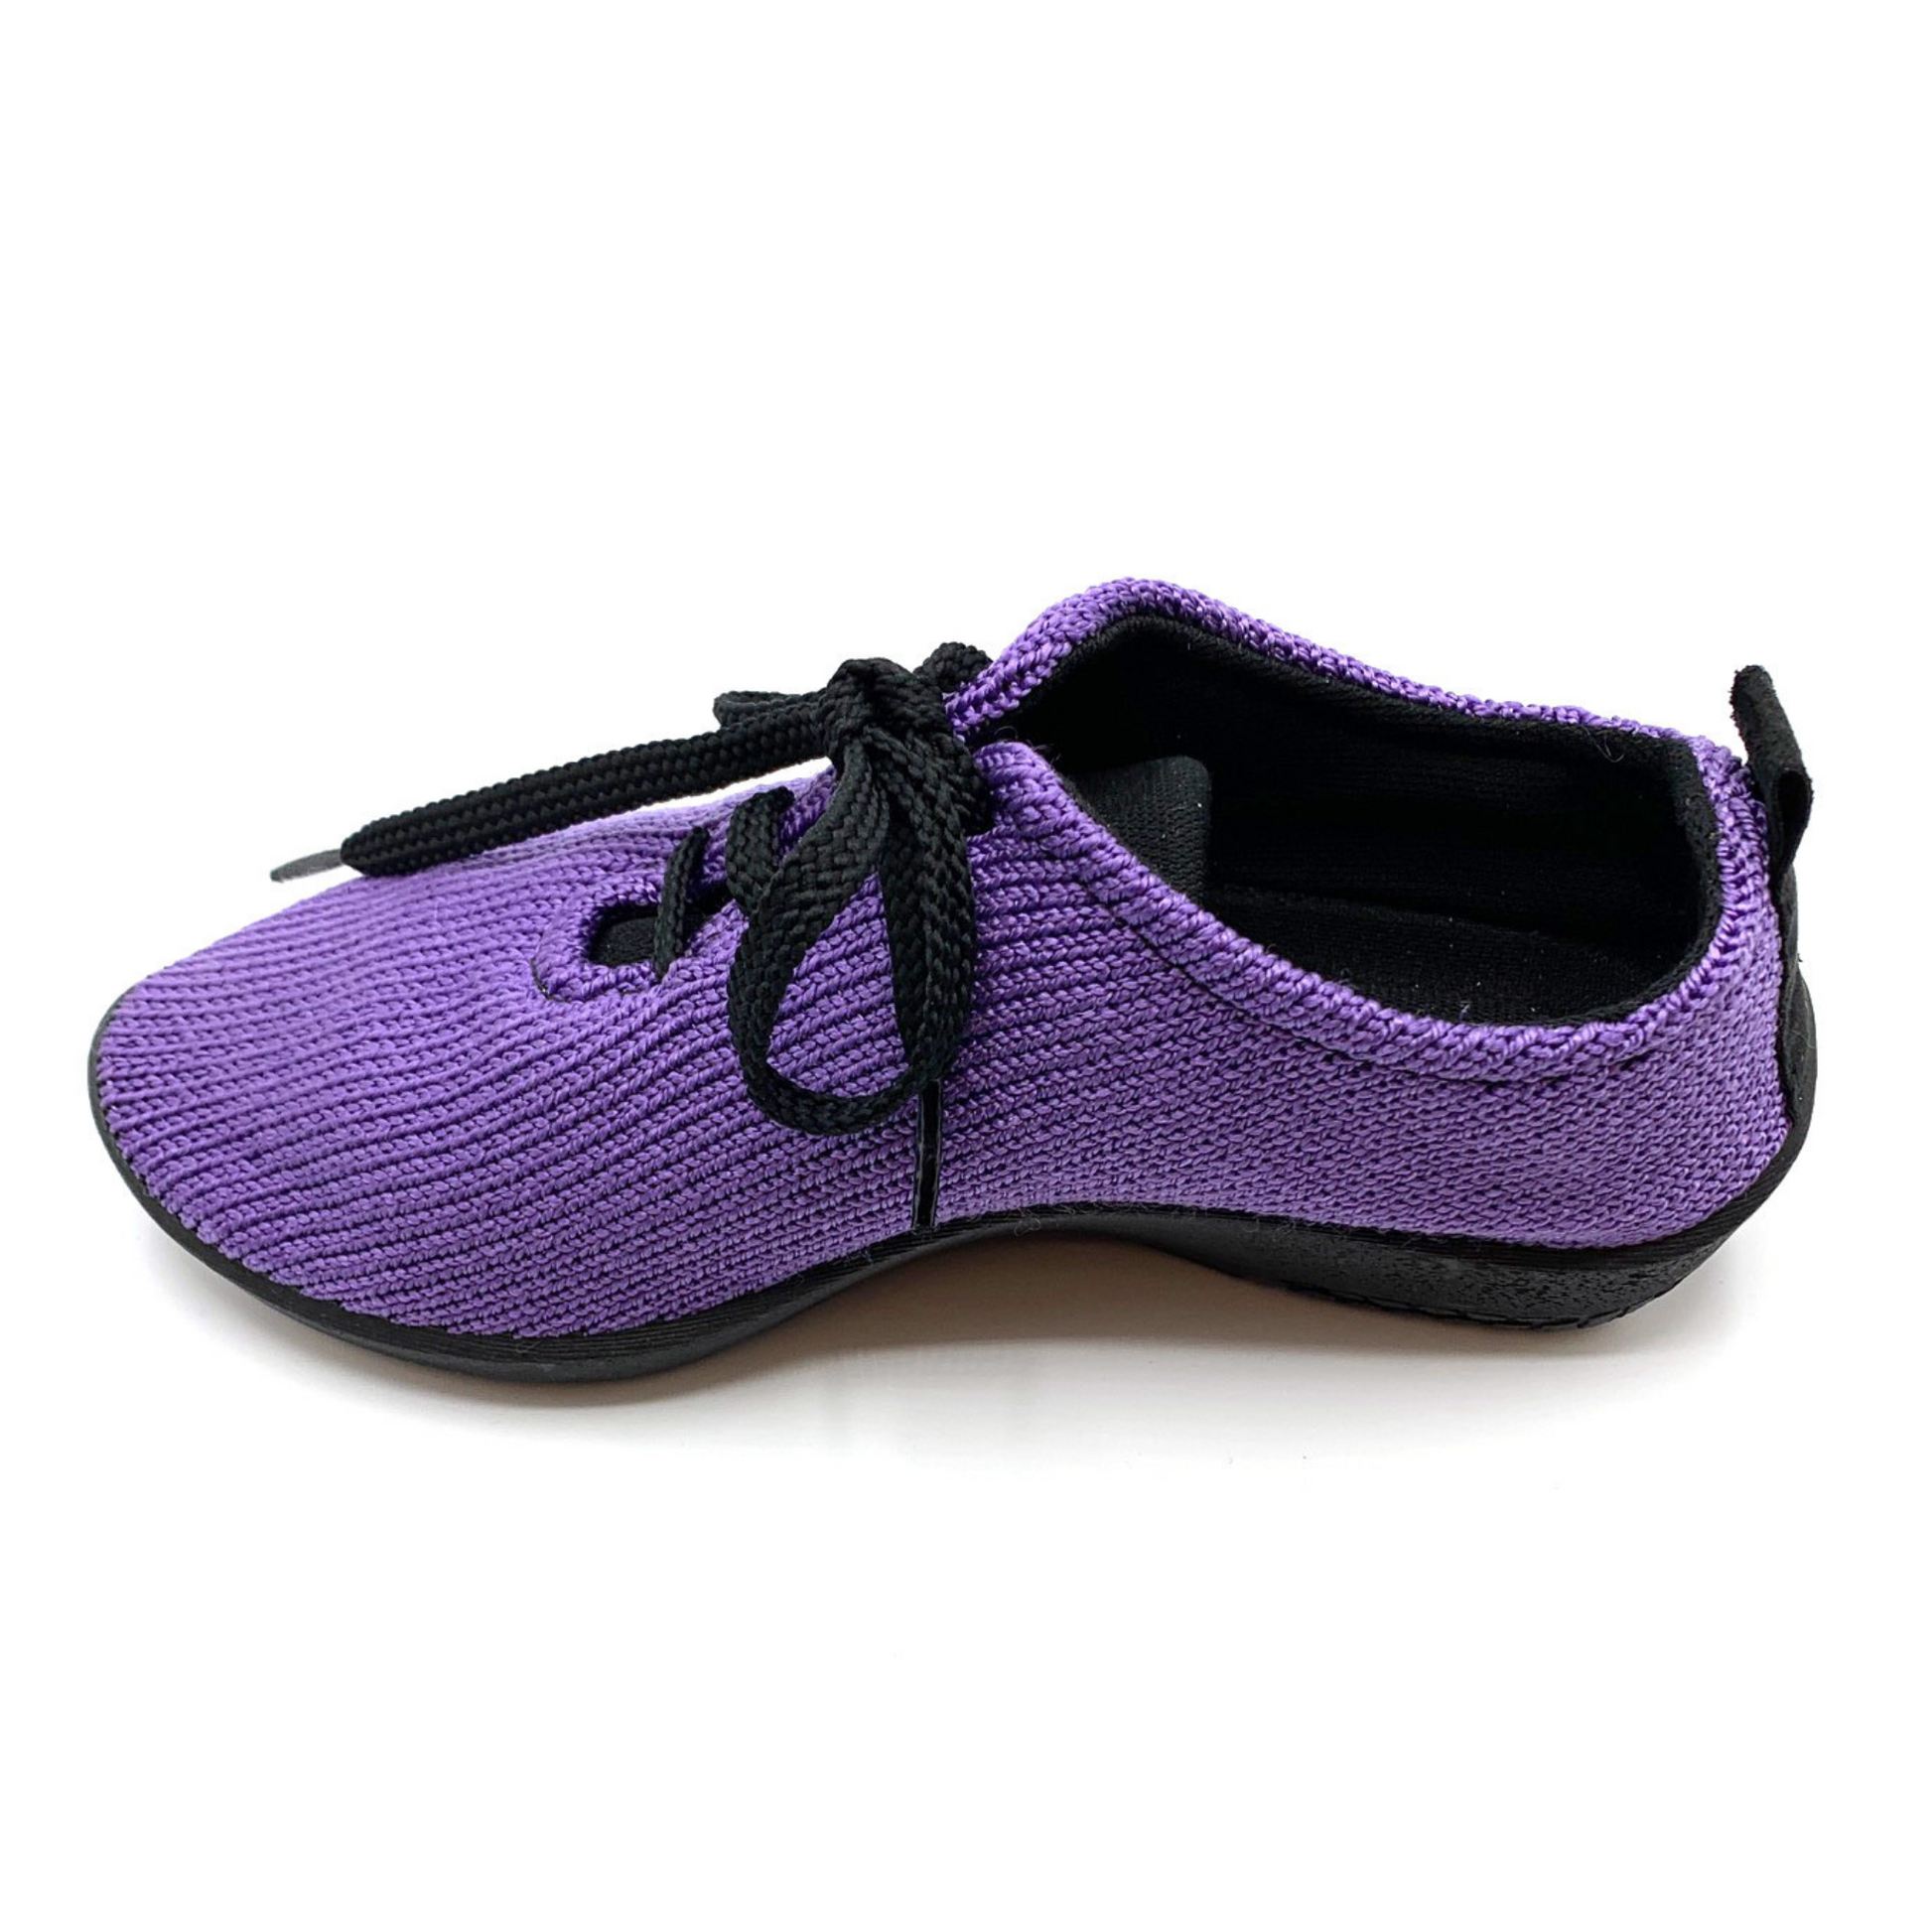 Purple sneaker pictured in profile featuring knit upper, black sole, lining, and black shoe strings.